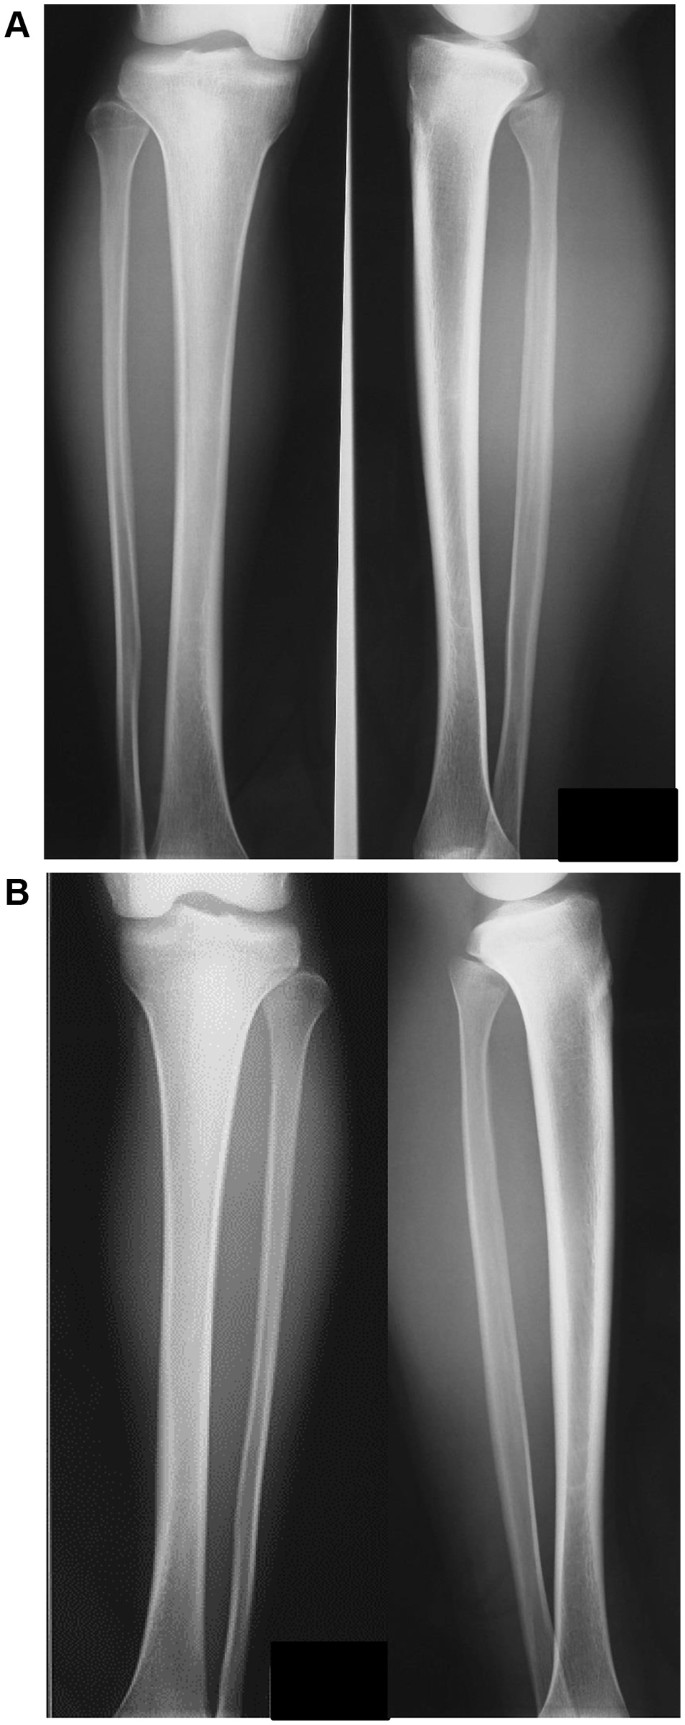 vertraging Tegenslag Glans A complete posterior tibial stress fracture that occurred during a  middle-distance running race: a case report | SpringerLink